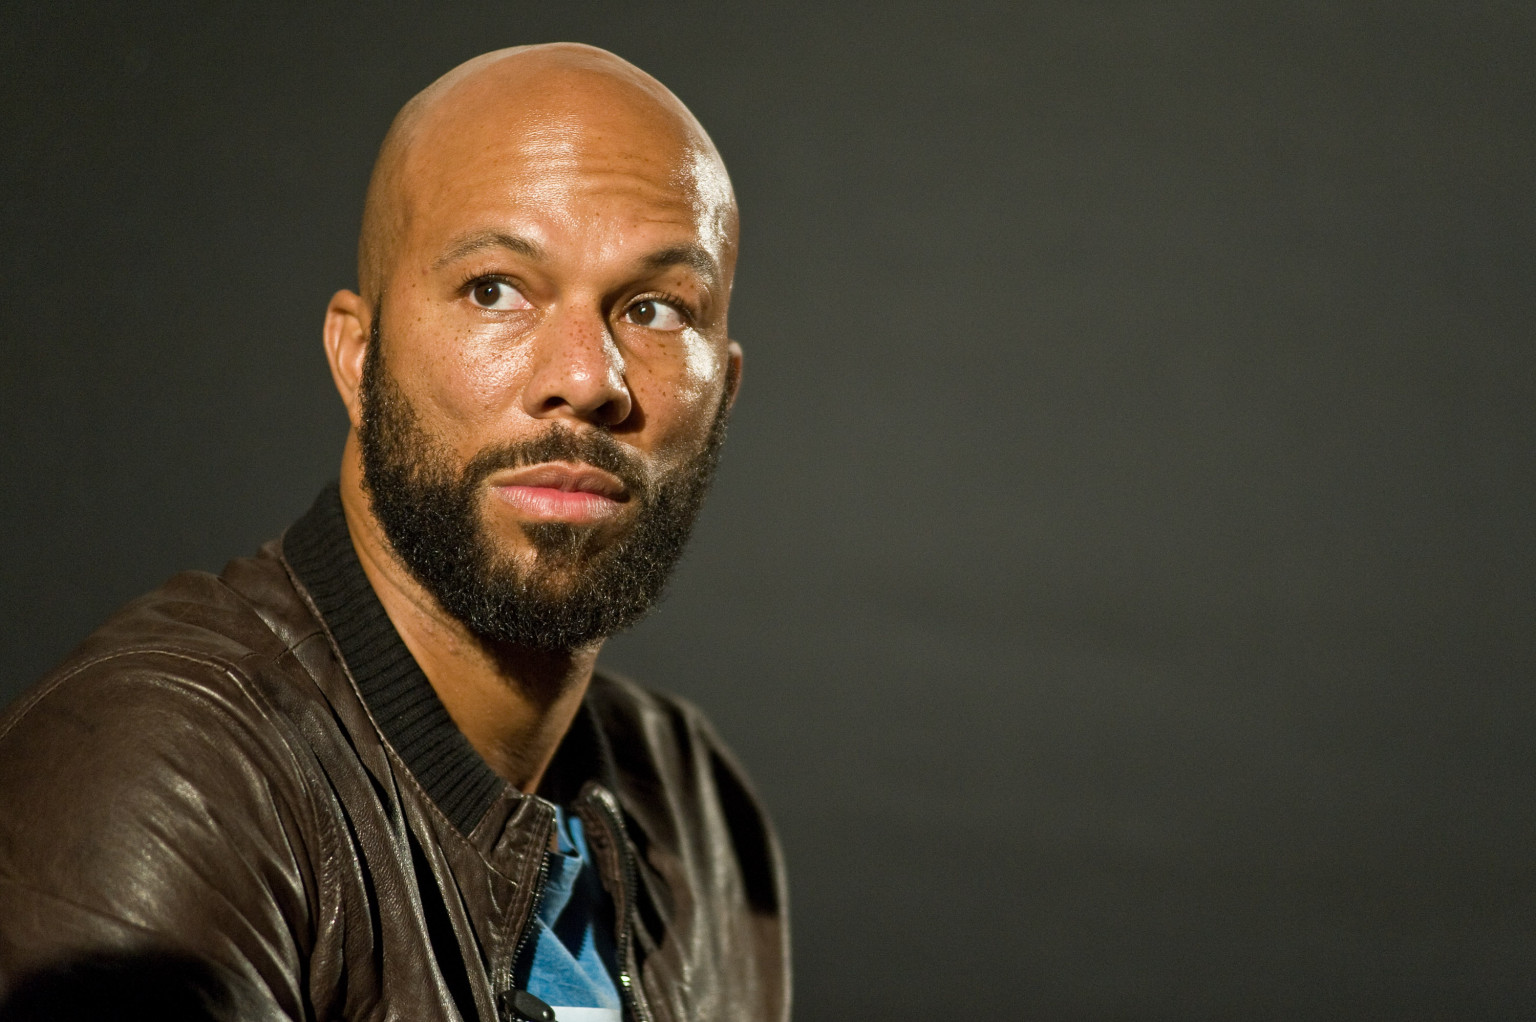 CHICAGO, IL - SEPTEMBER 10:  Common attends a Special Screening Of "Luv" Presented By The Common Foundation at Showplace Icon Theater on September 10, 2012 in Chicago, Illinois.  (Photo by Timothy Hiatt/Getty Images)